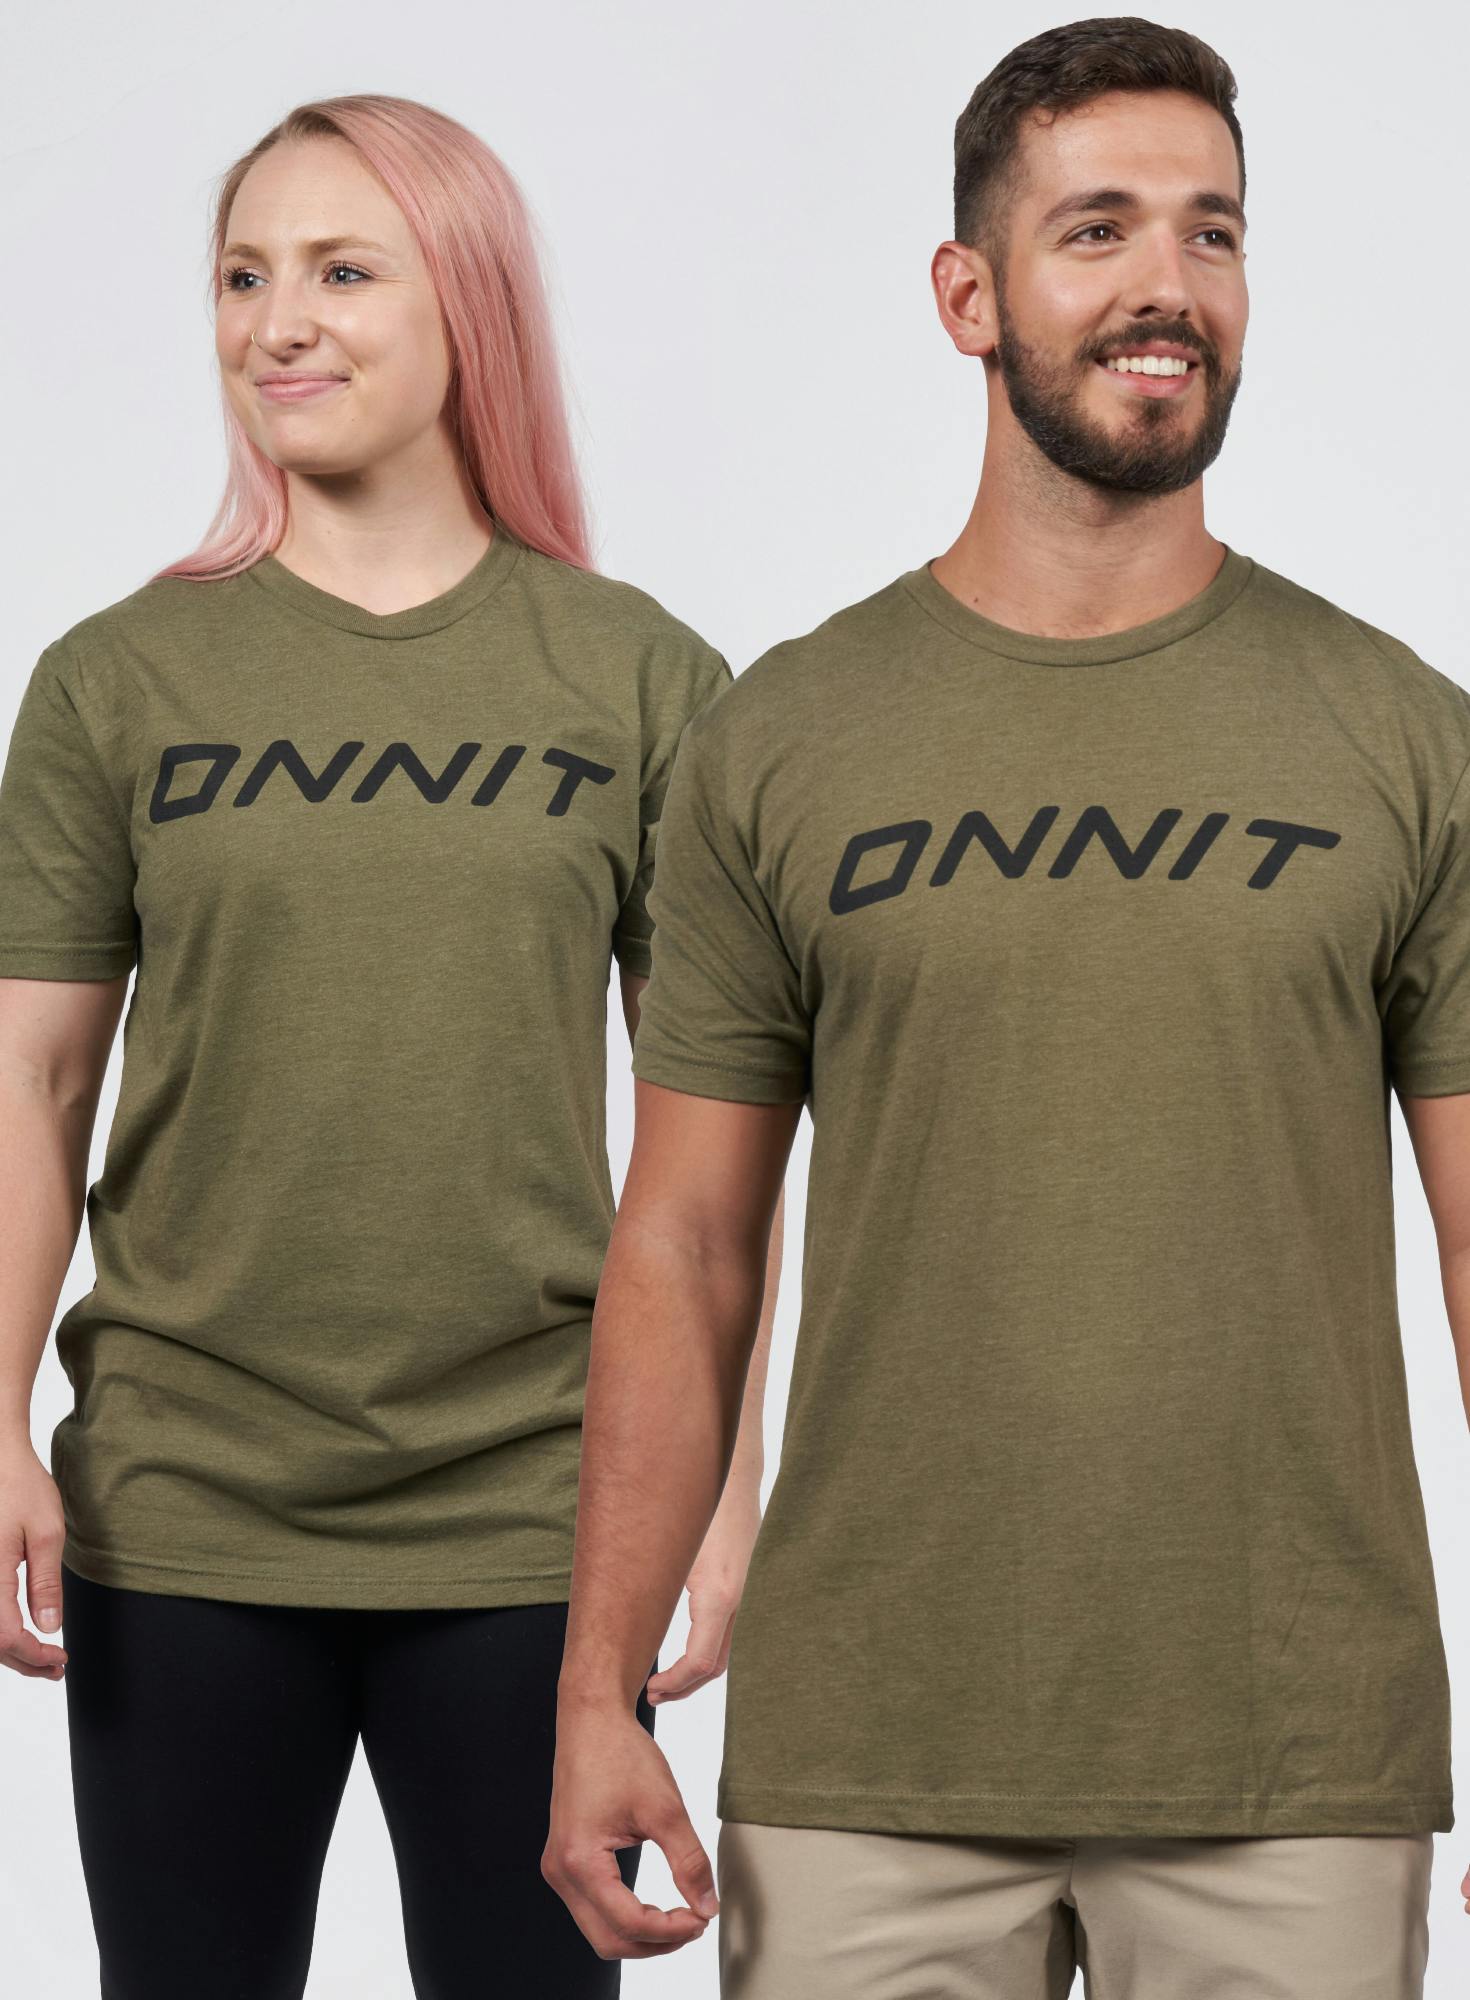 Onnit Type T-Shirt